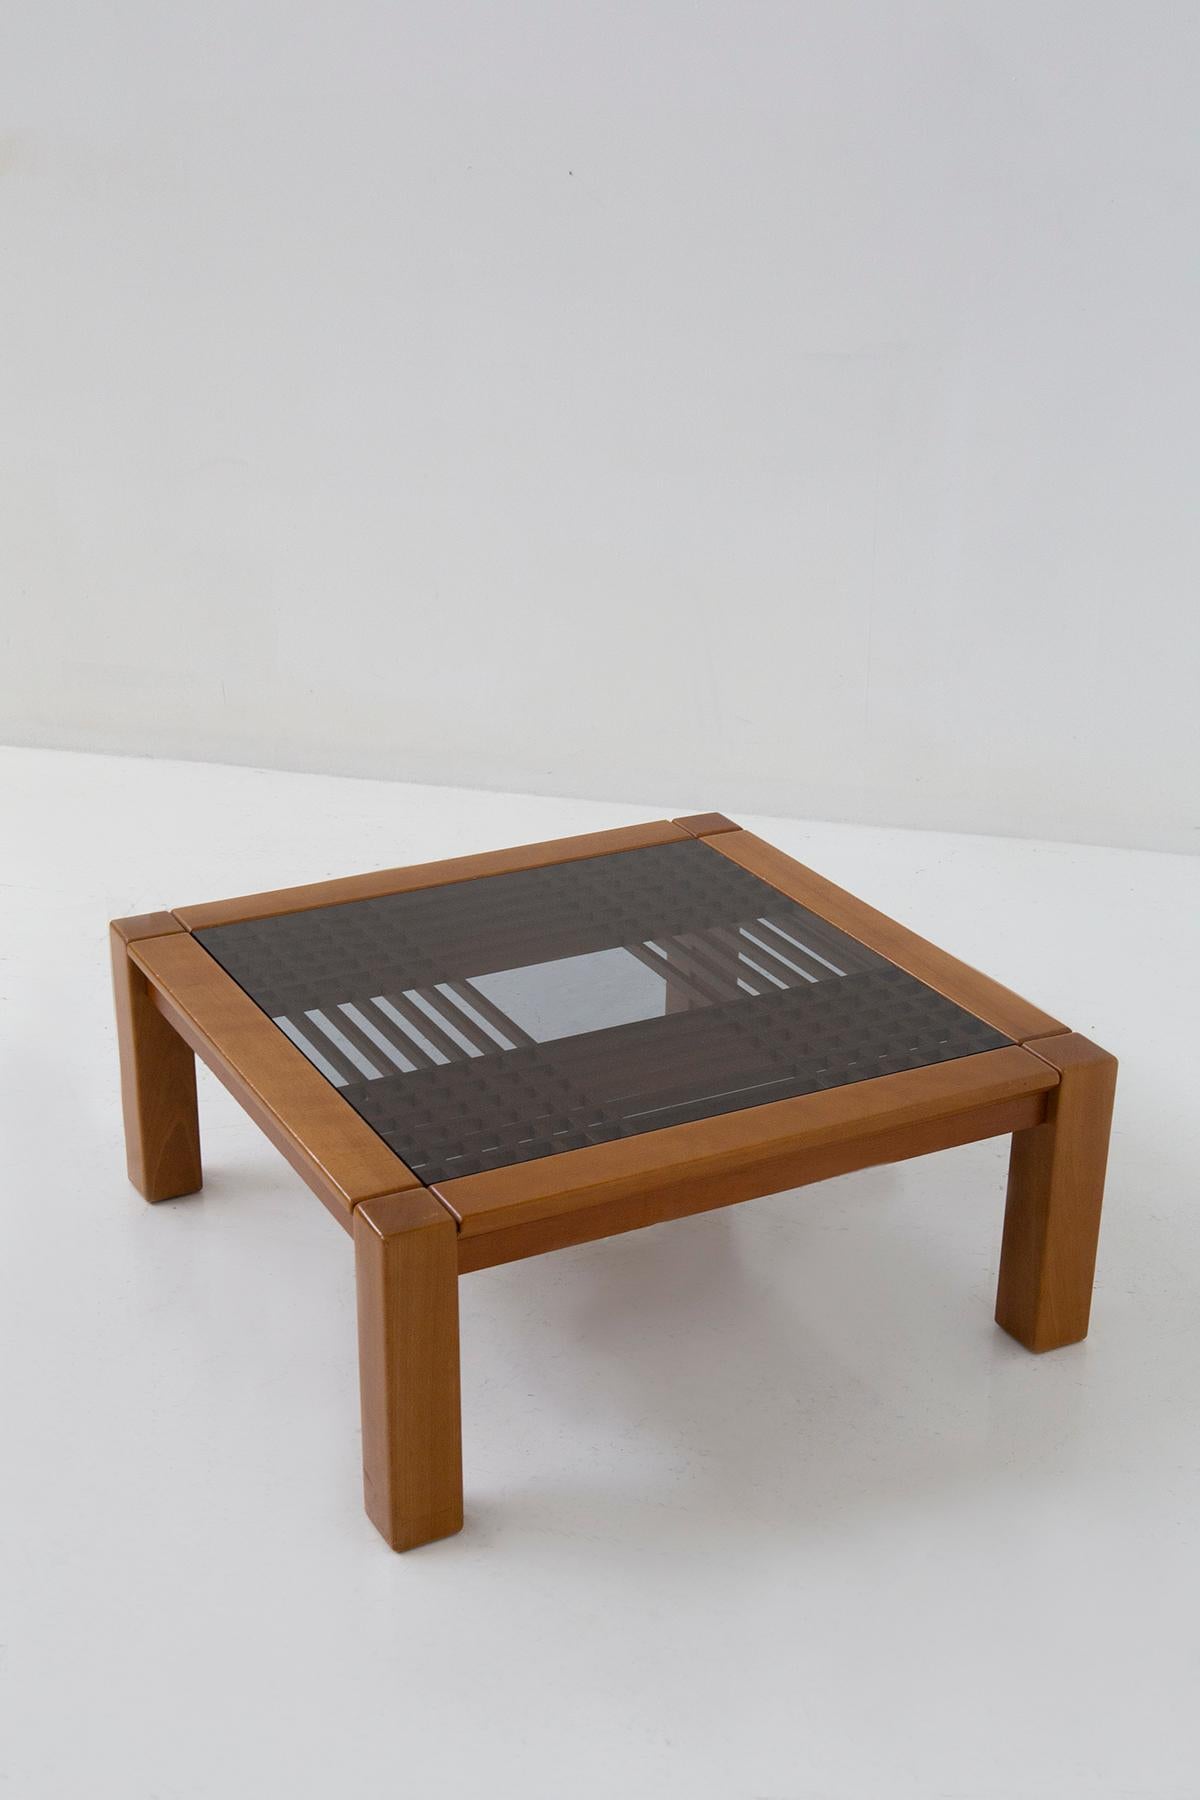 Step into the world of timeless elegance with this exquisite modernist coffee table, a true masterpiece designed by none other than the legendary Ettore Sottsass during the vibrant 1960s. Crafted with precision by Santambrogio & De Berti, this table